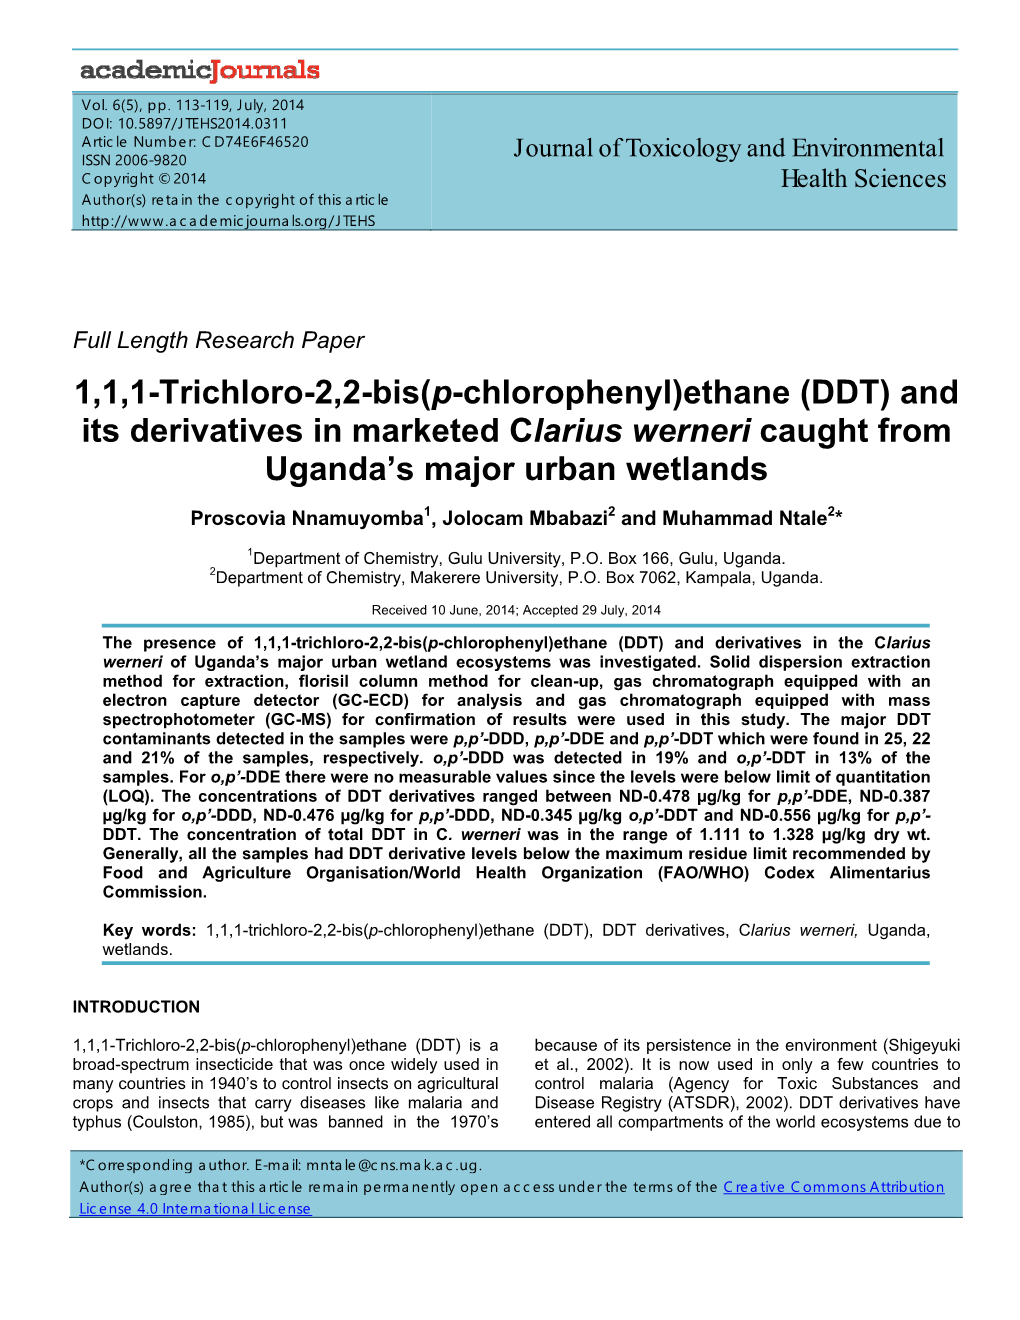 Ethane (DDT) and Its Derivatives in Marketed Clarius Werneri Caught from Uganda’S Major Urban Wetlands